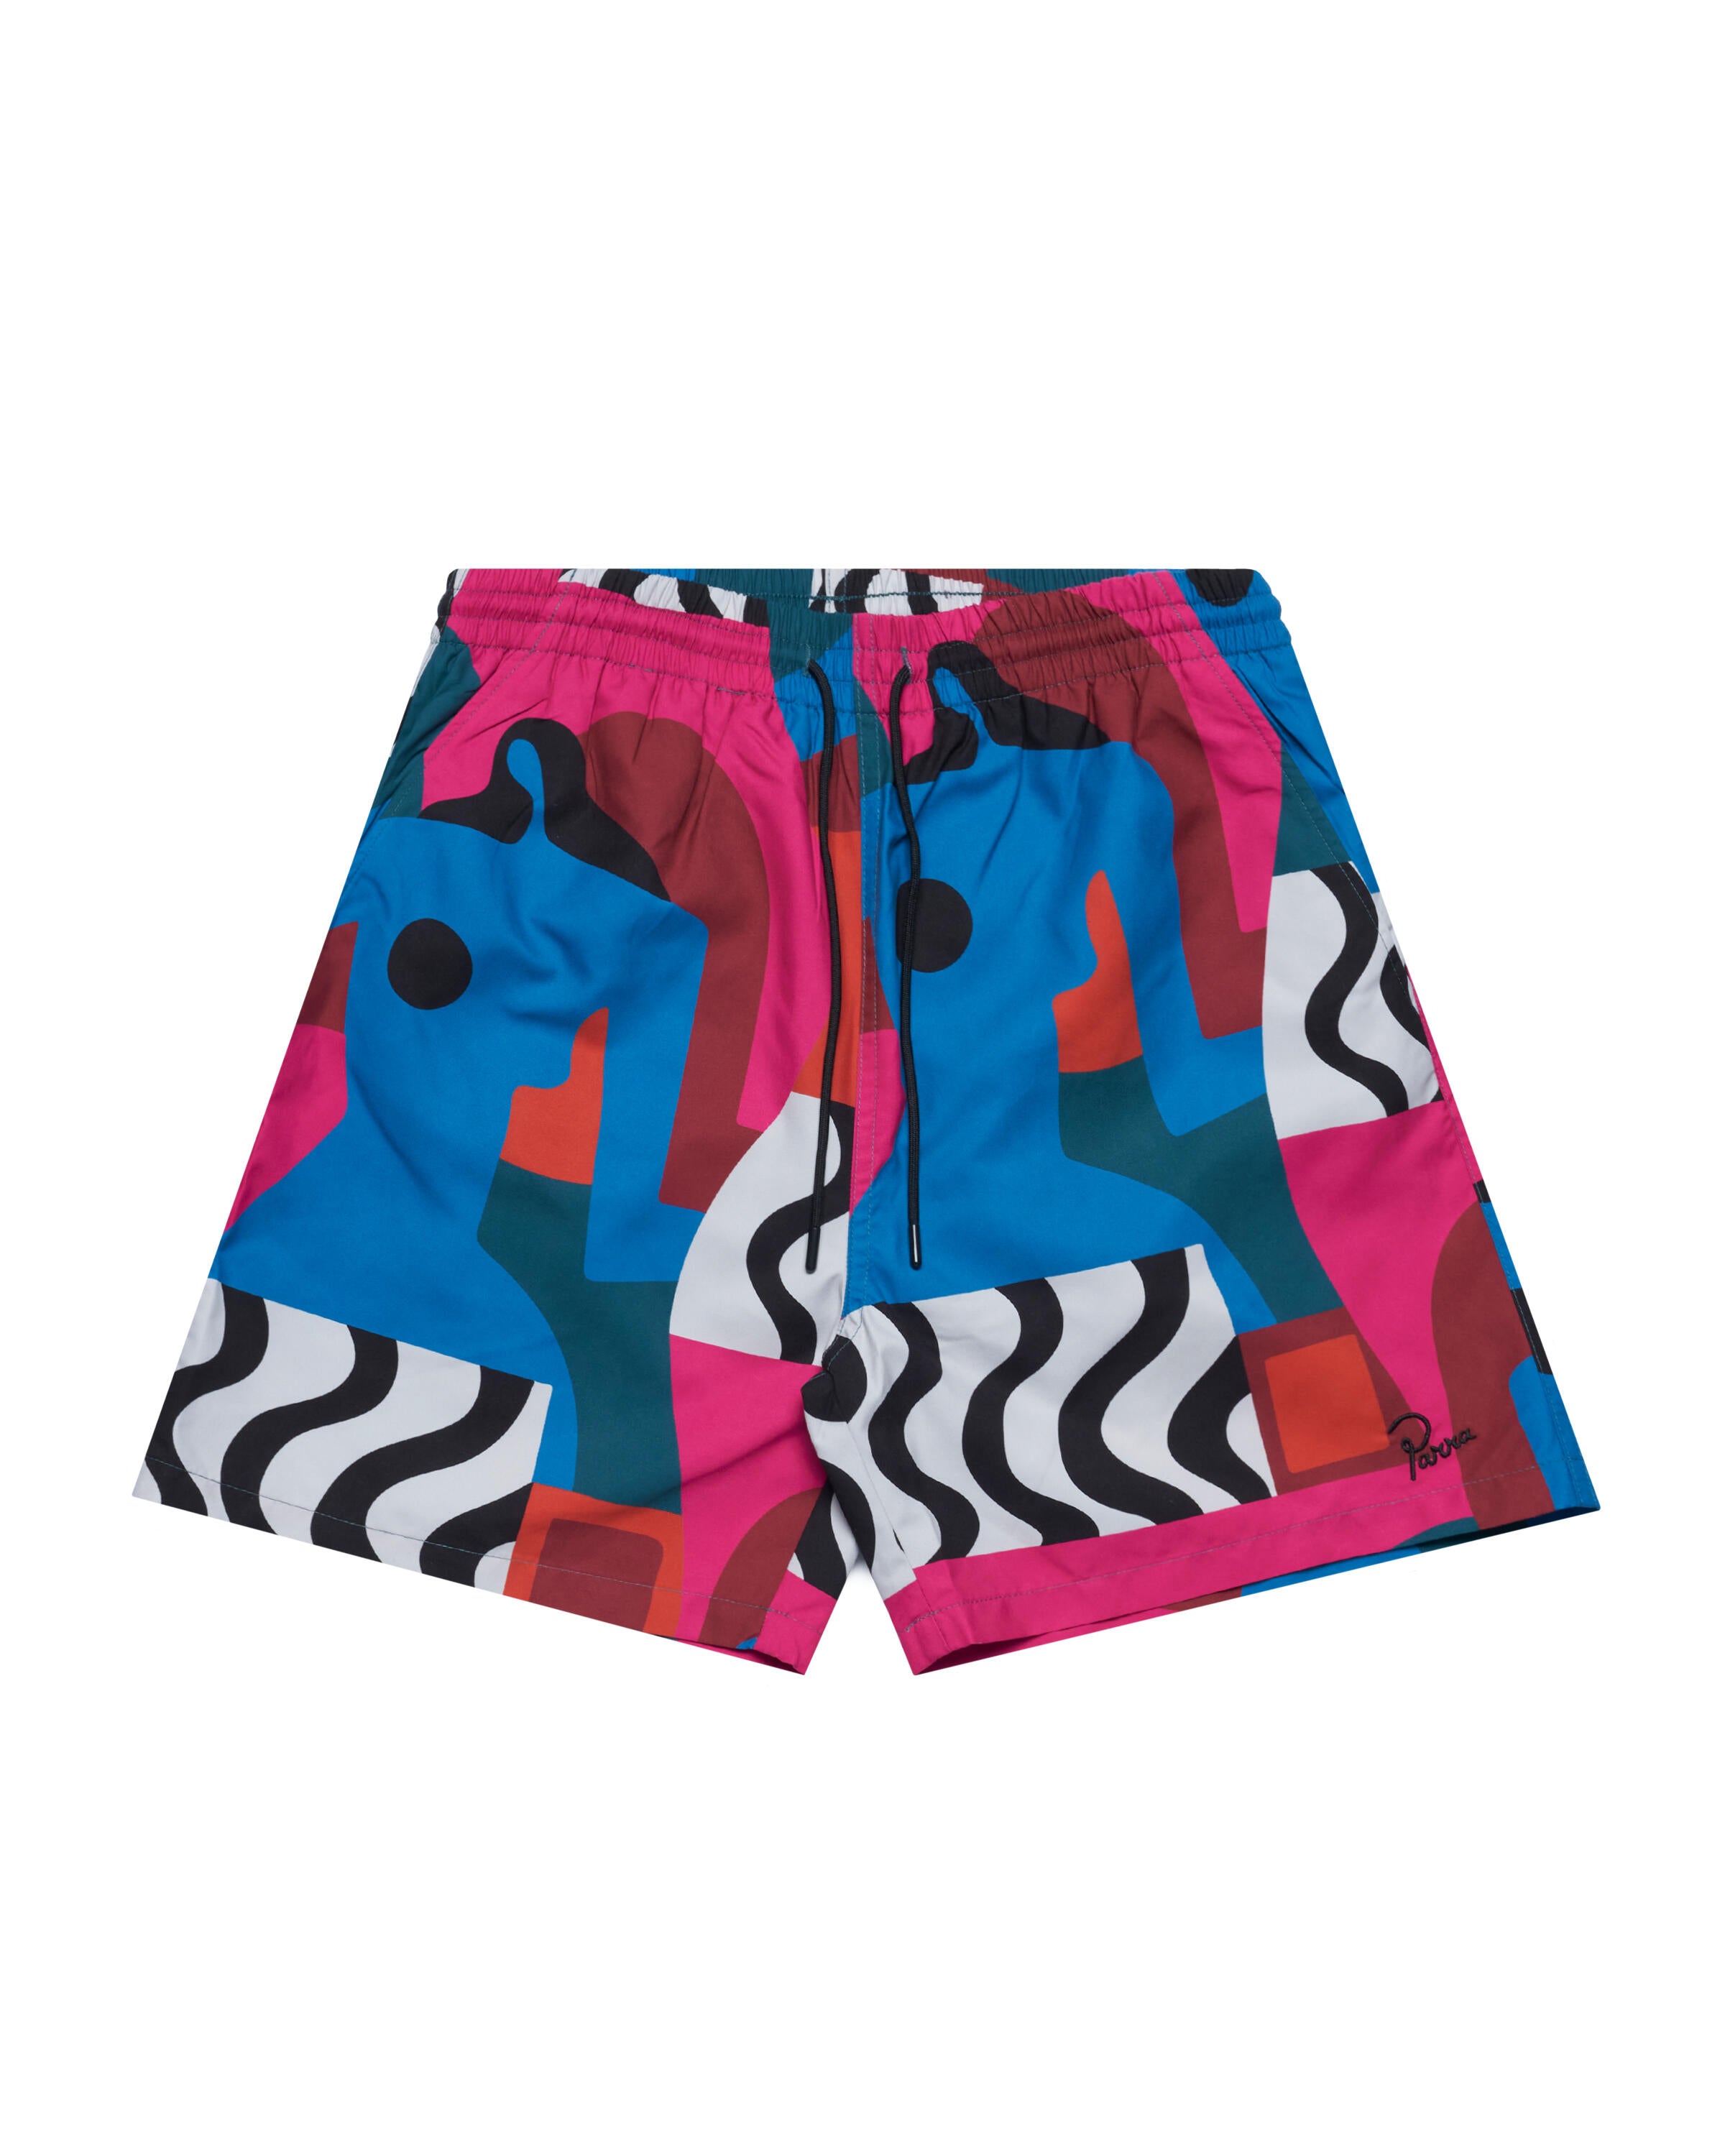 by Parra distorted water swim shorts